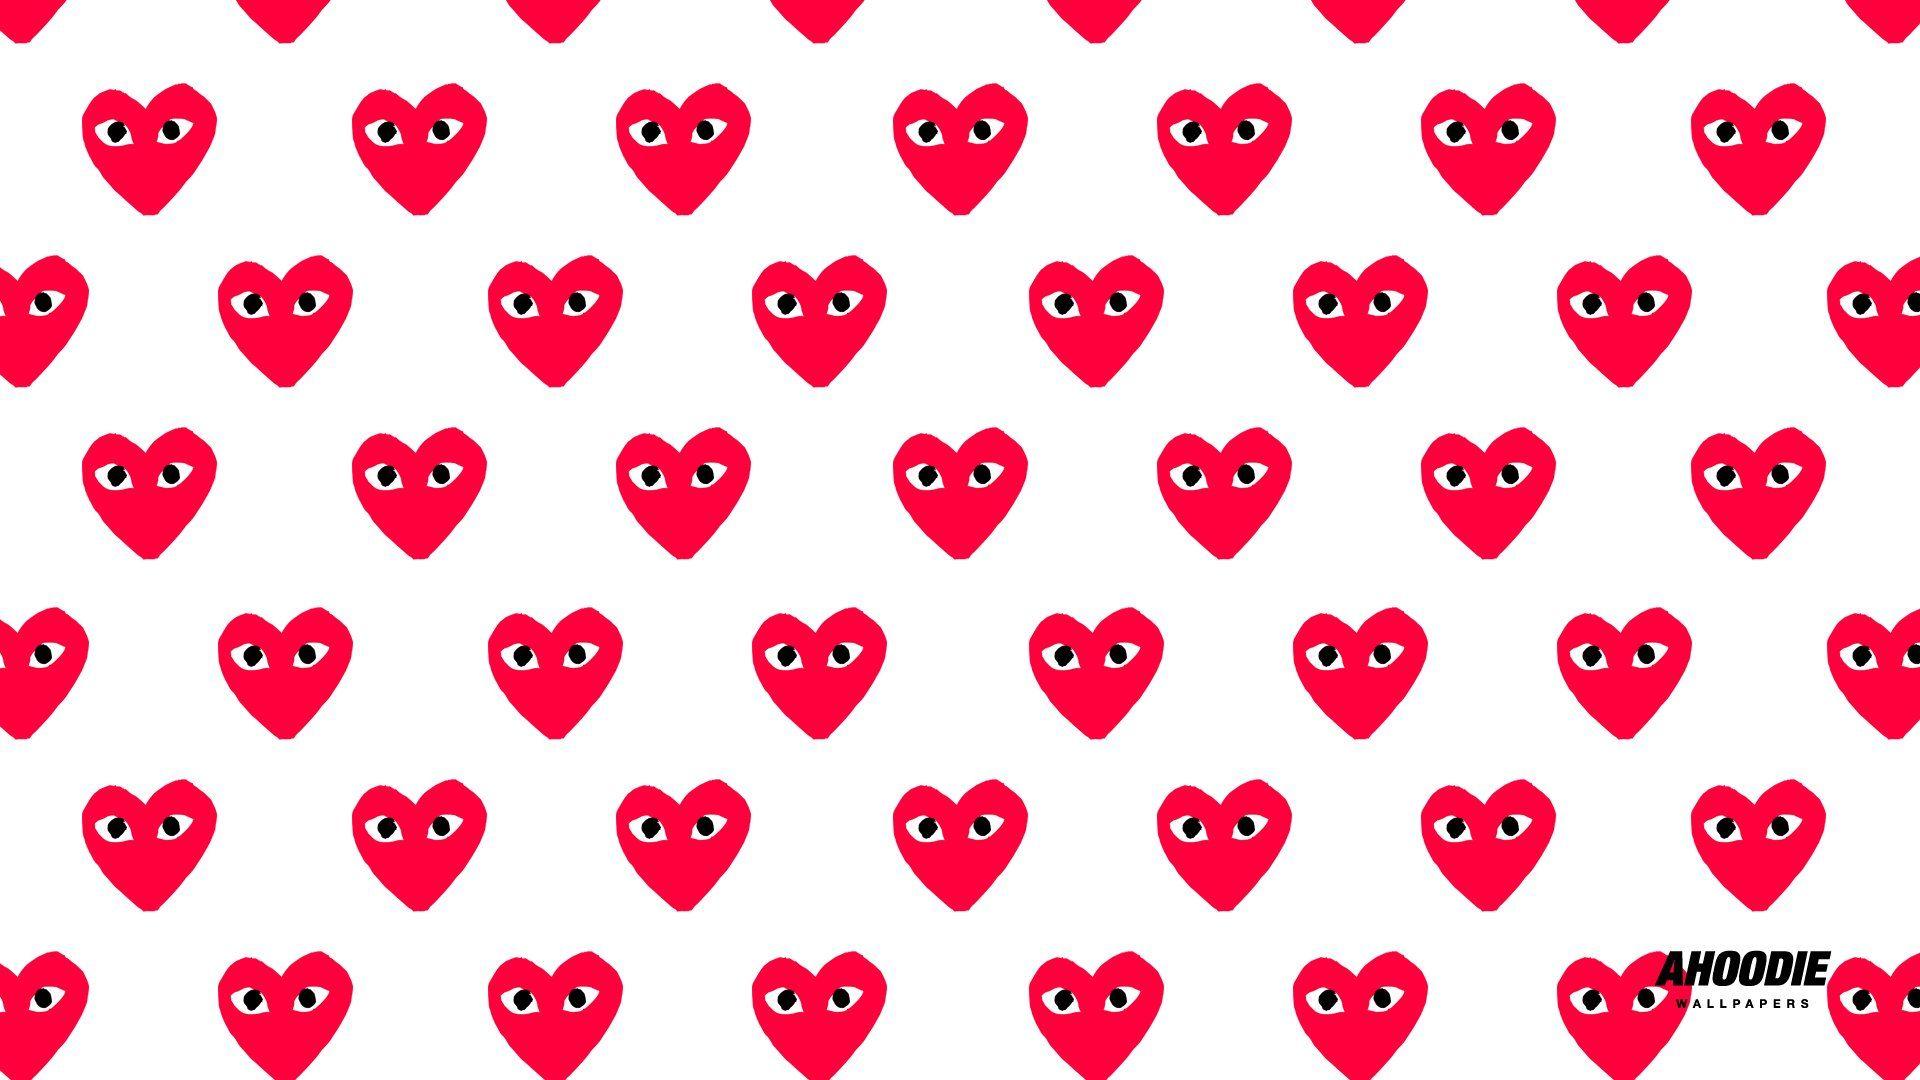 Download Bape Heart Wallpaper In High Quality Free